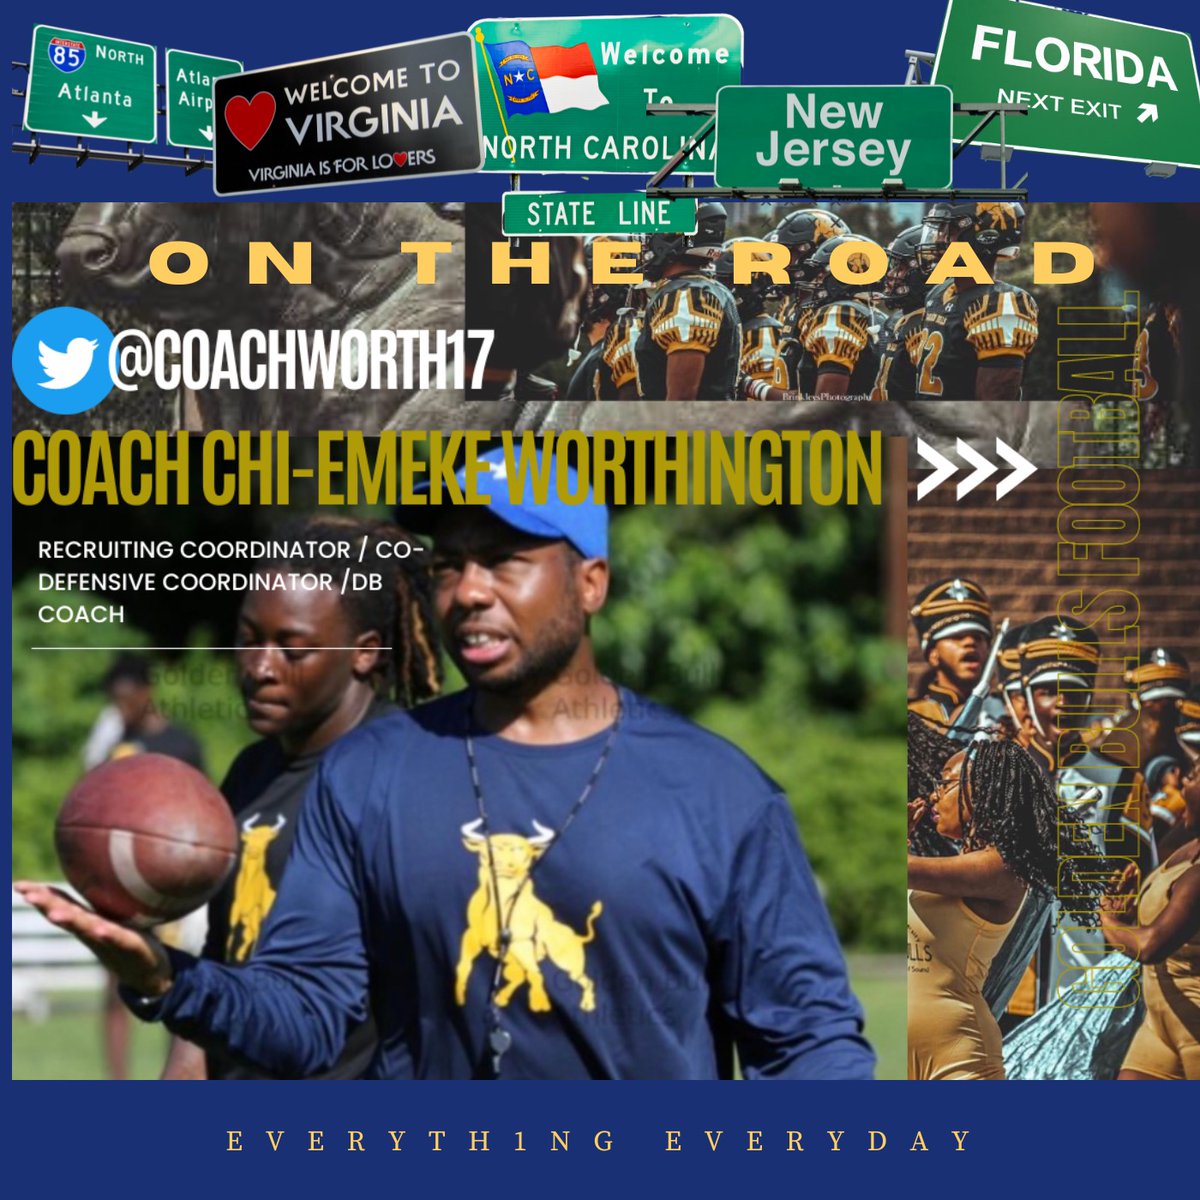 Back on the road Volusia County drop that film!
#EVERYTH1NGEVERYDAY #JCSU #GOLDENBULLS #STAMPEDE #HBCUFOOTBALL #COACHLIFE #HOLDHIGH